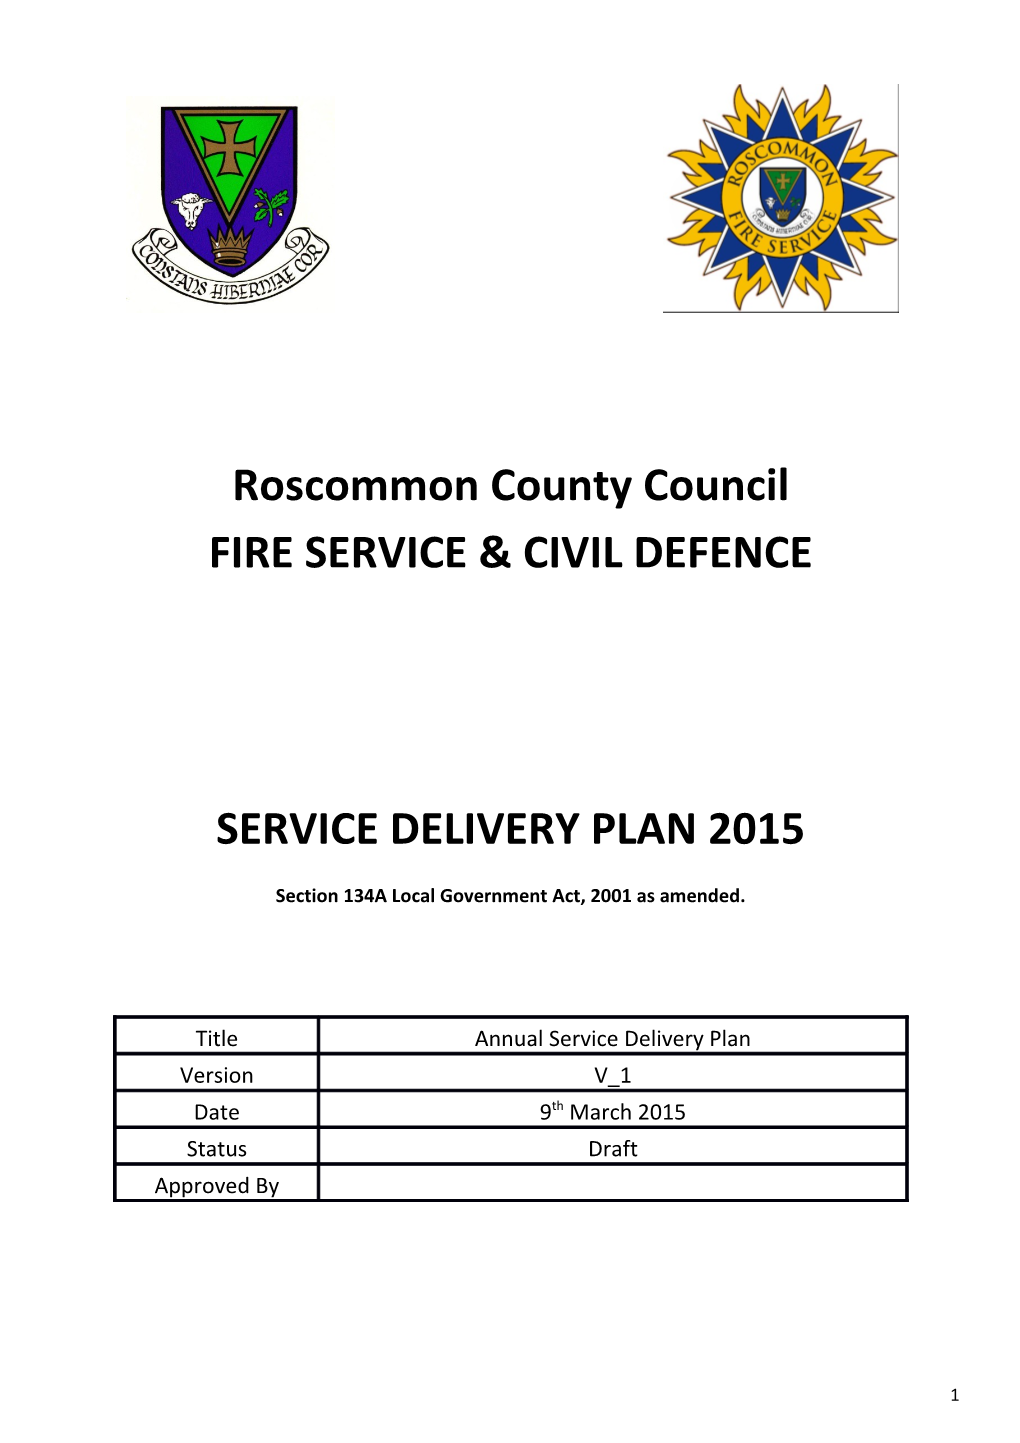 Roscommon County Council FIRE SERVICE & CIVIL DEFENCE